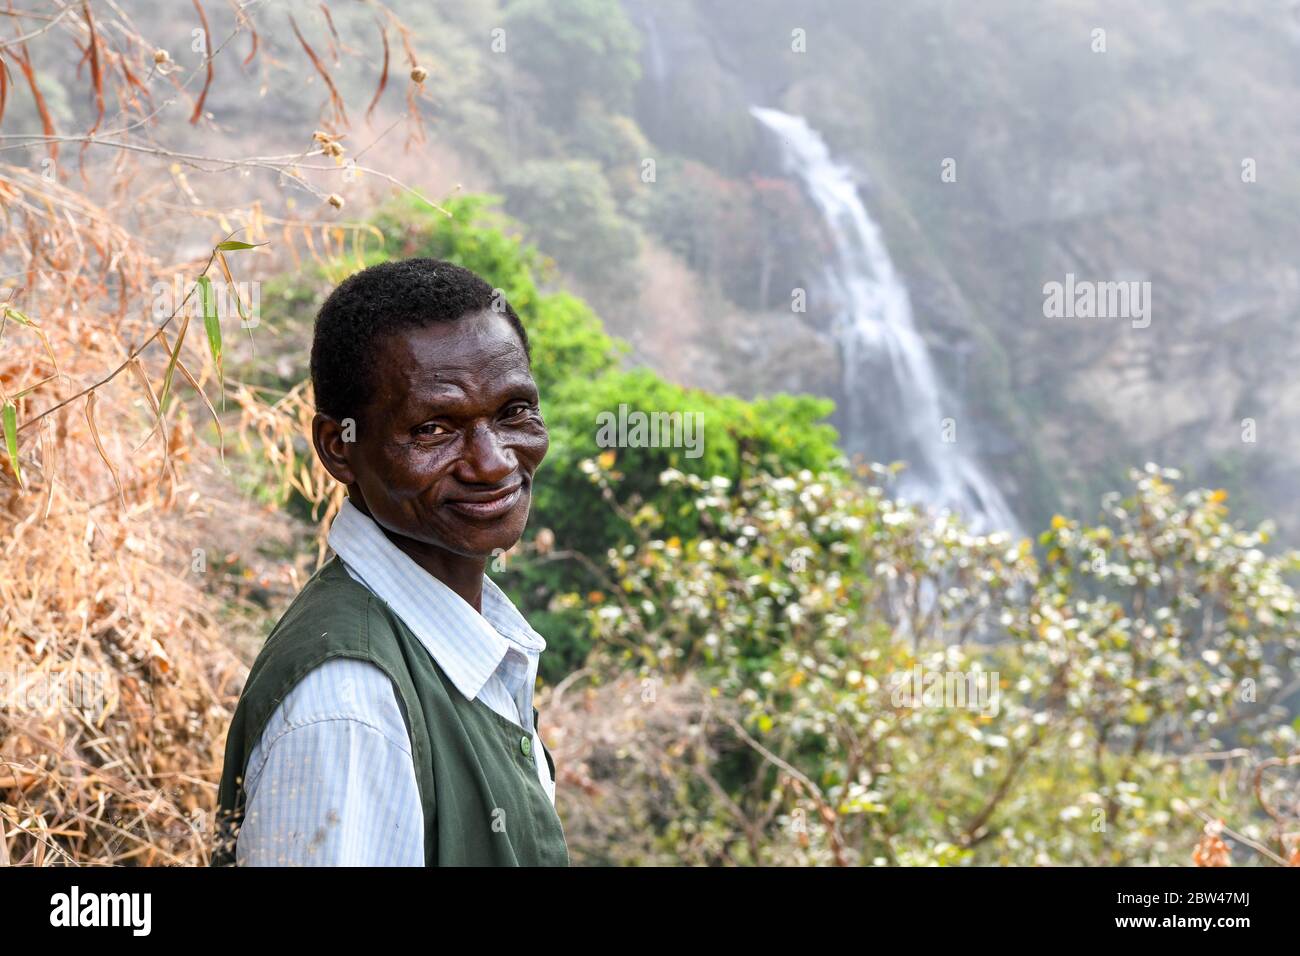 Africa, West Africa, Ghana, Wli Falls. The guide leads the way through the jungle to the Wli Falls in the middle of the mountain. Stock Photo